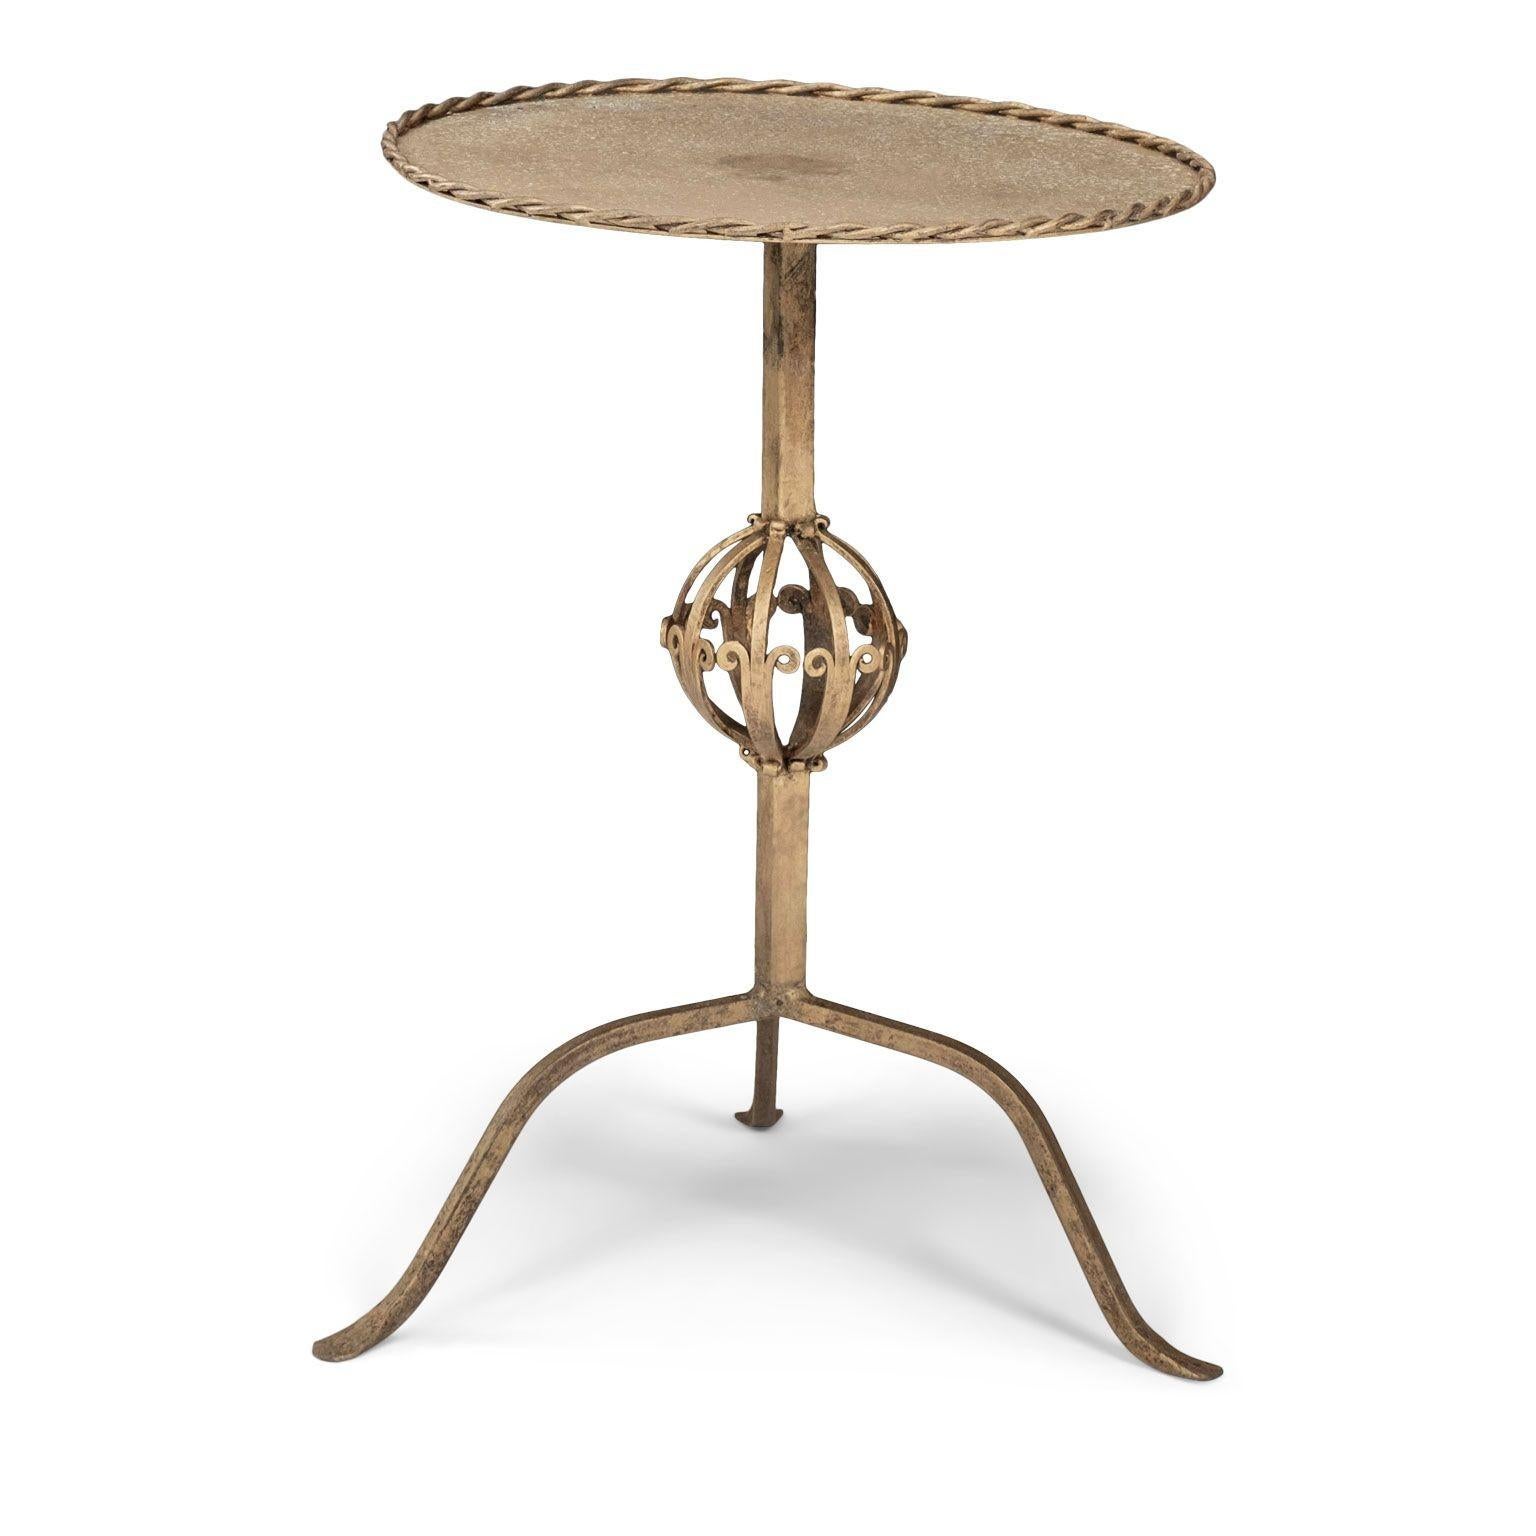 Gilt-iron martini table circa 1945-1965, Spain. Low twisted-iron gallery, spiraled decoration and tripod base. Original gilded finish.